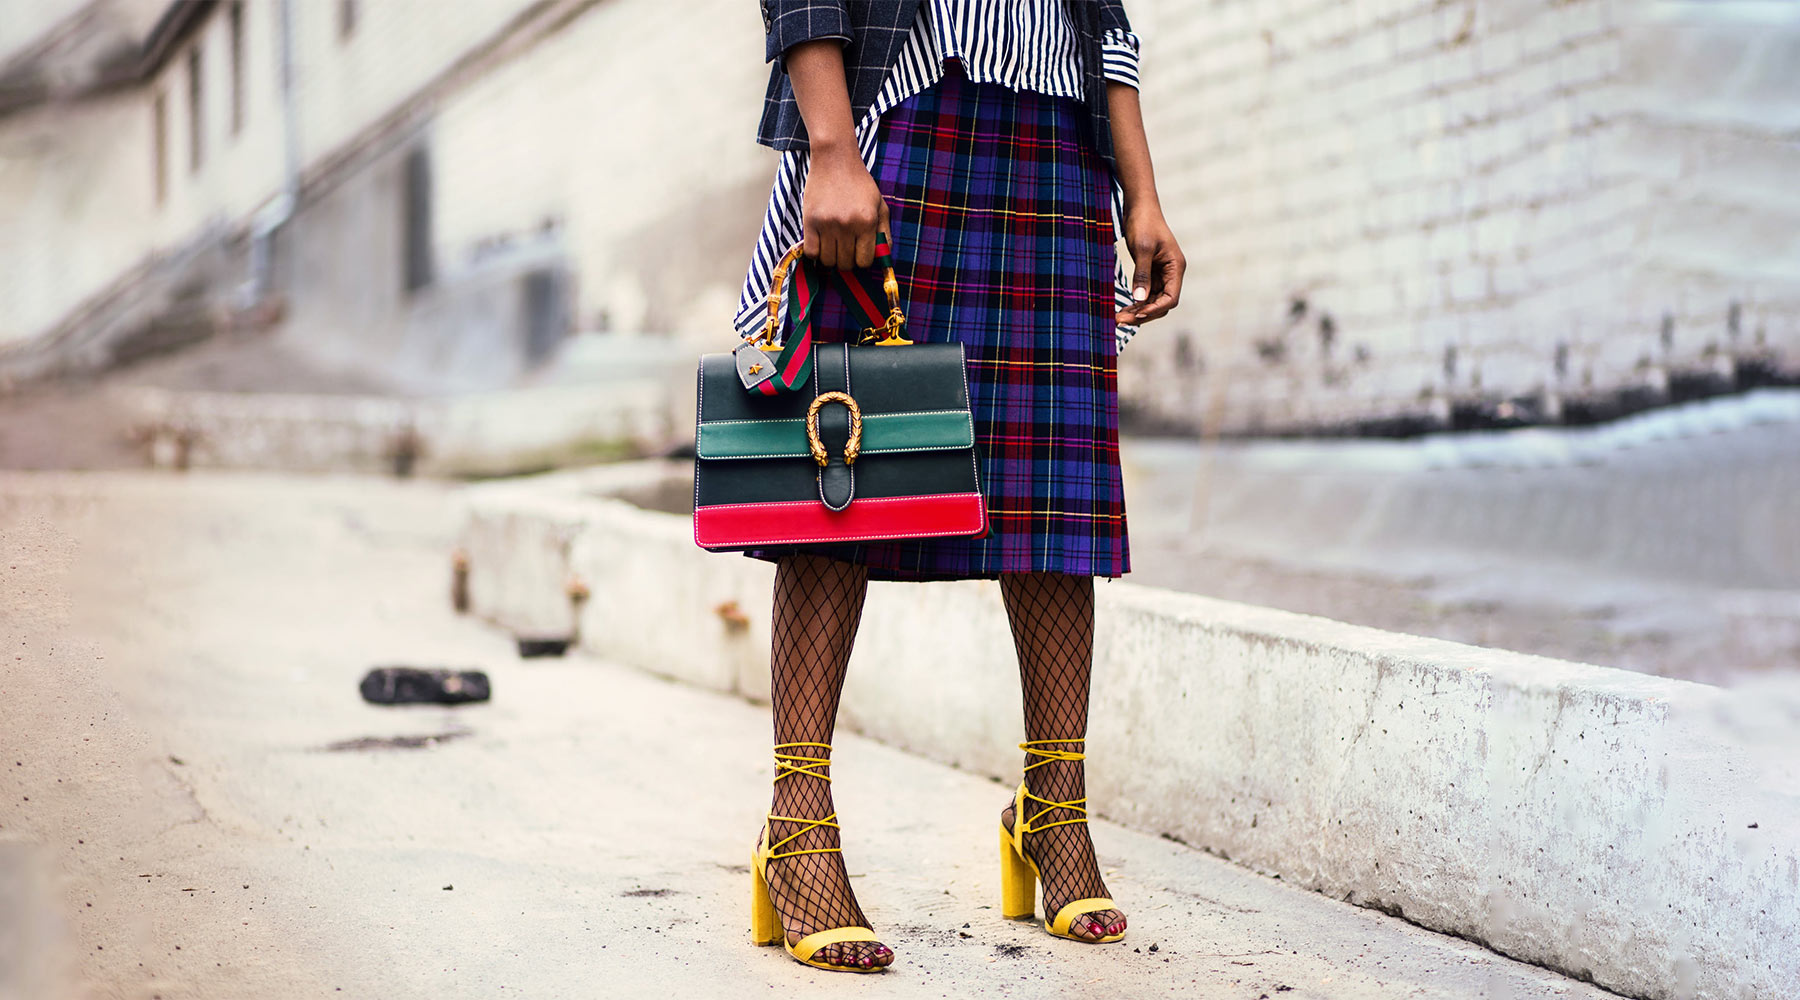 woman in colorful plaid skirt with bright yellow platform sandals and loudly striped purse